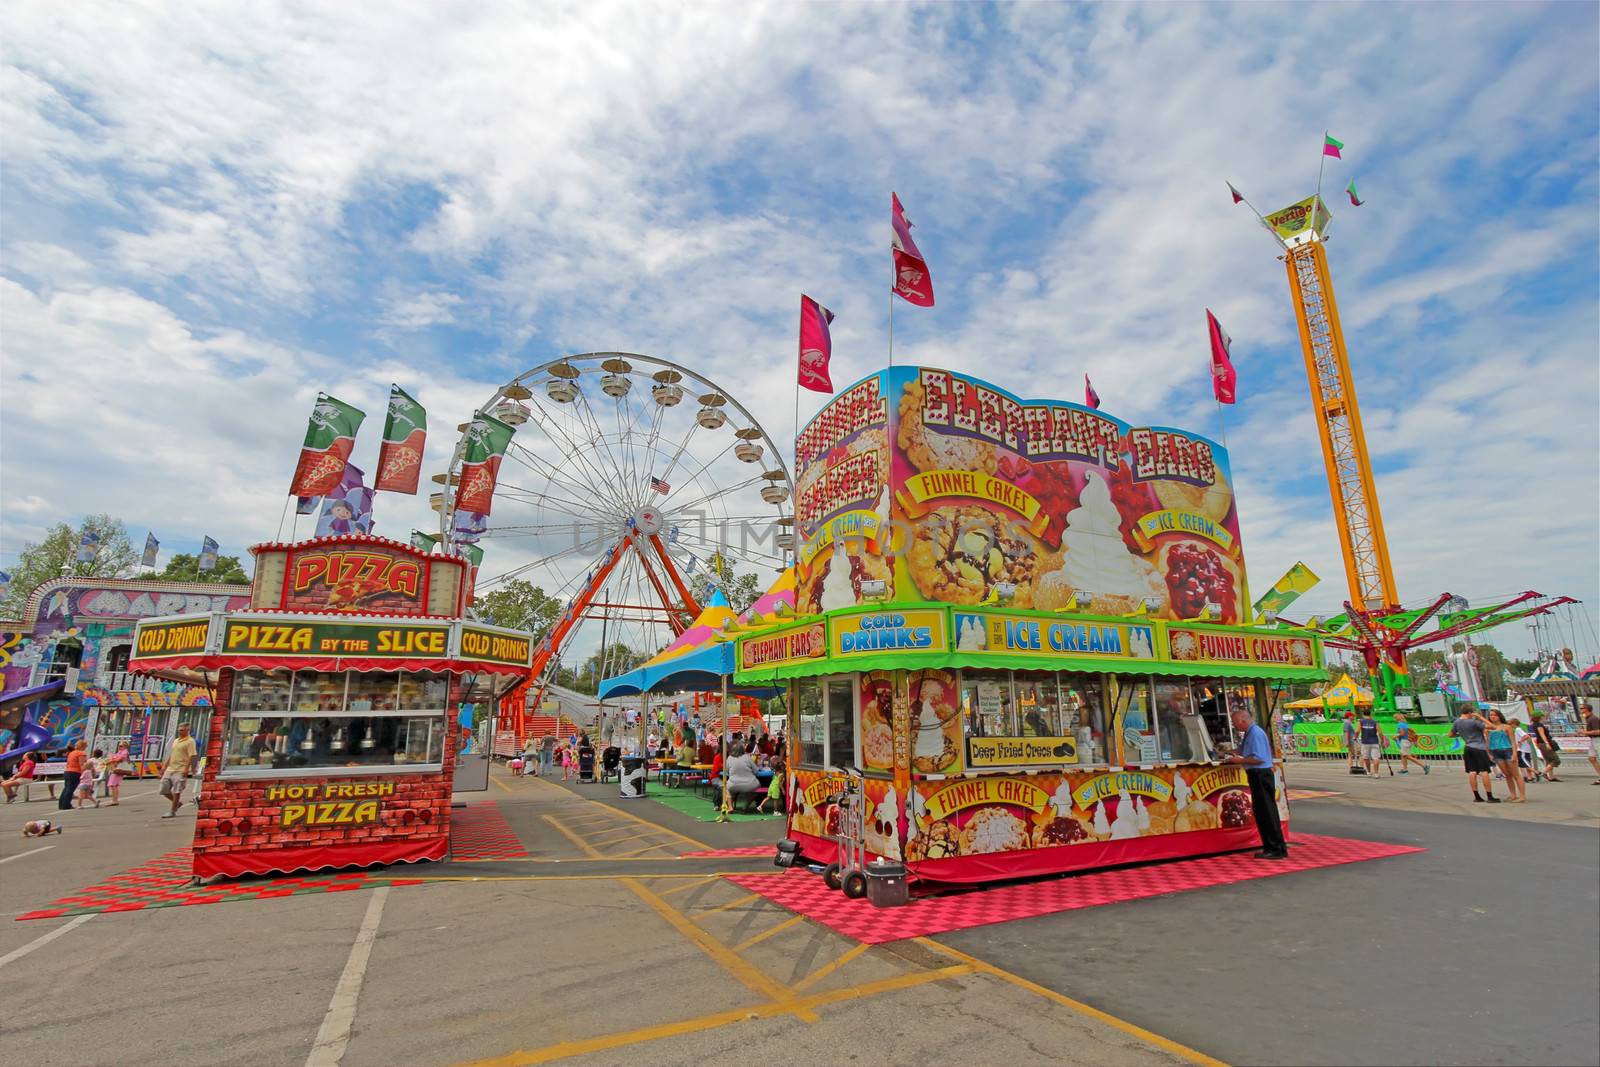 Vendors and rides on the Midway at the Indiana State Fair by sgoodwin4813